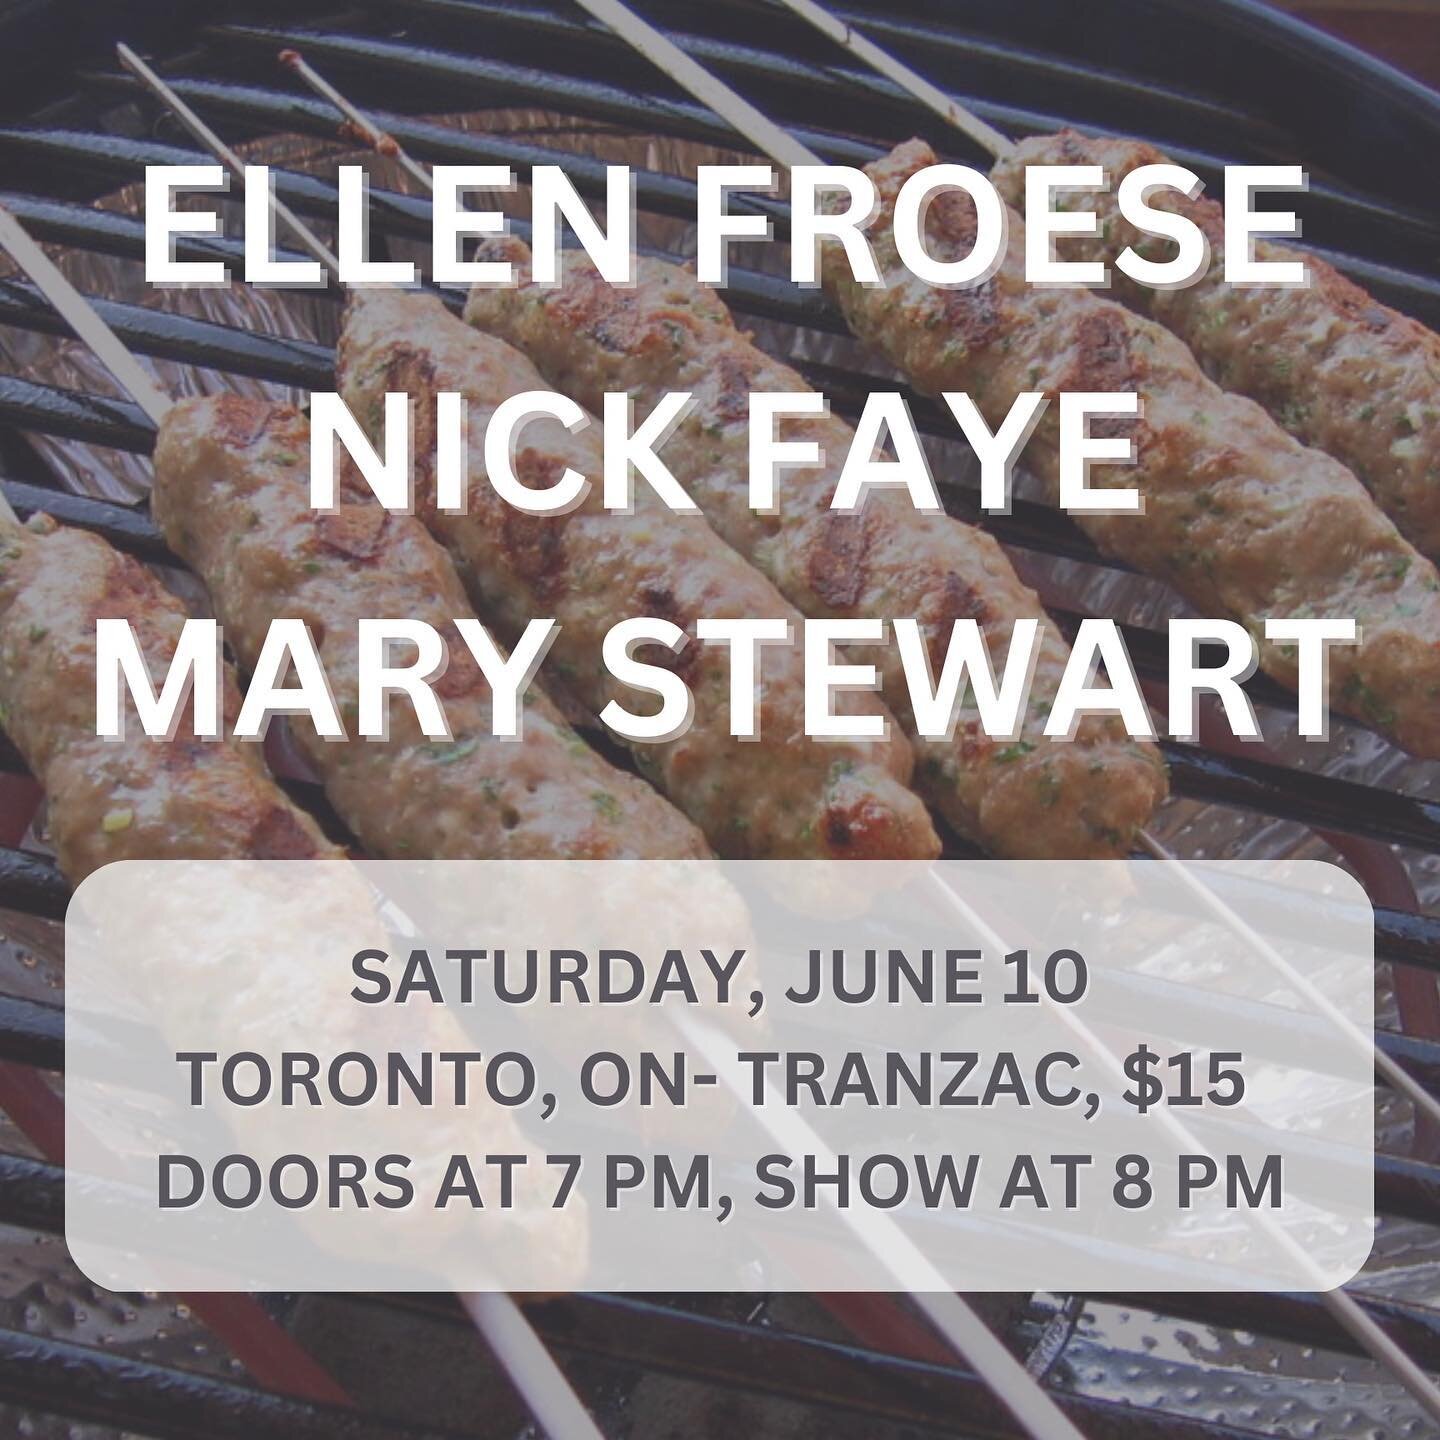 Toronto, Regina, Winnipeg.. SUMMERTIME SHOWS YAHOOO! So excited to play some songs with so many amazing pals in fun towns this summer!

June 10 - @tranzac292 in Toronto w/ @skelliefroese, @marystewartmusic 

June 23 - @artesianon13th in Regina w/ @ri